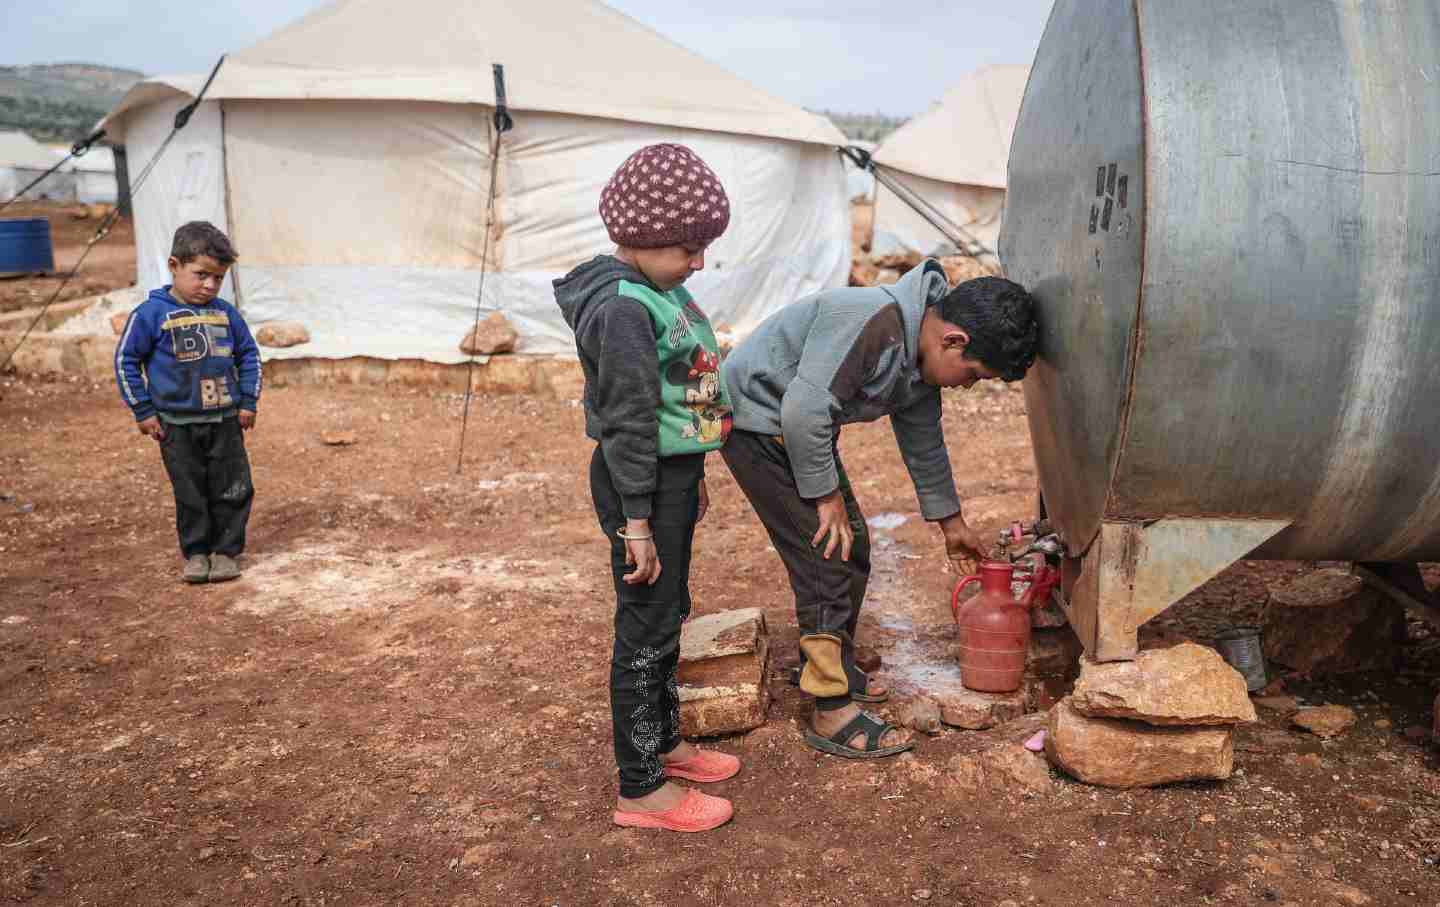 Syrian children draw from a water container at a refugee camp in the village of Kafr Aruq.